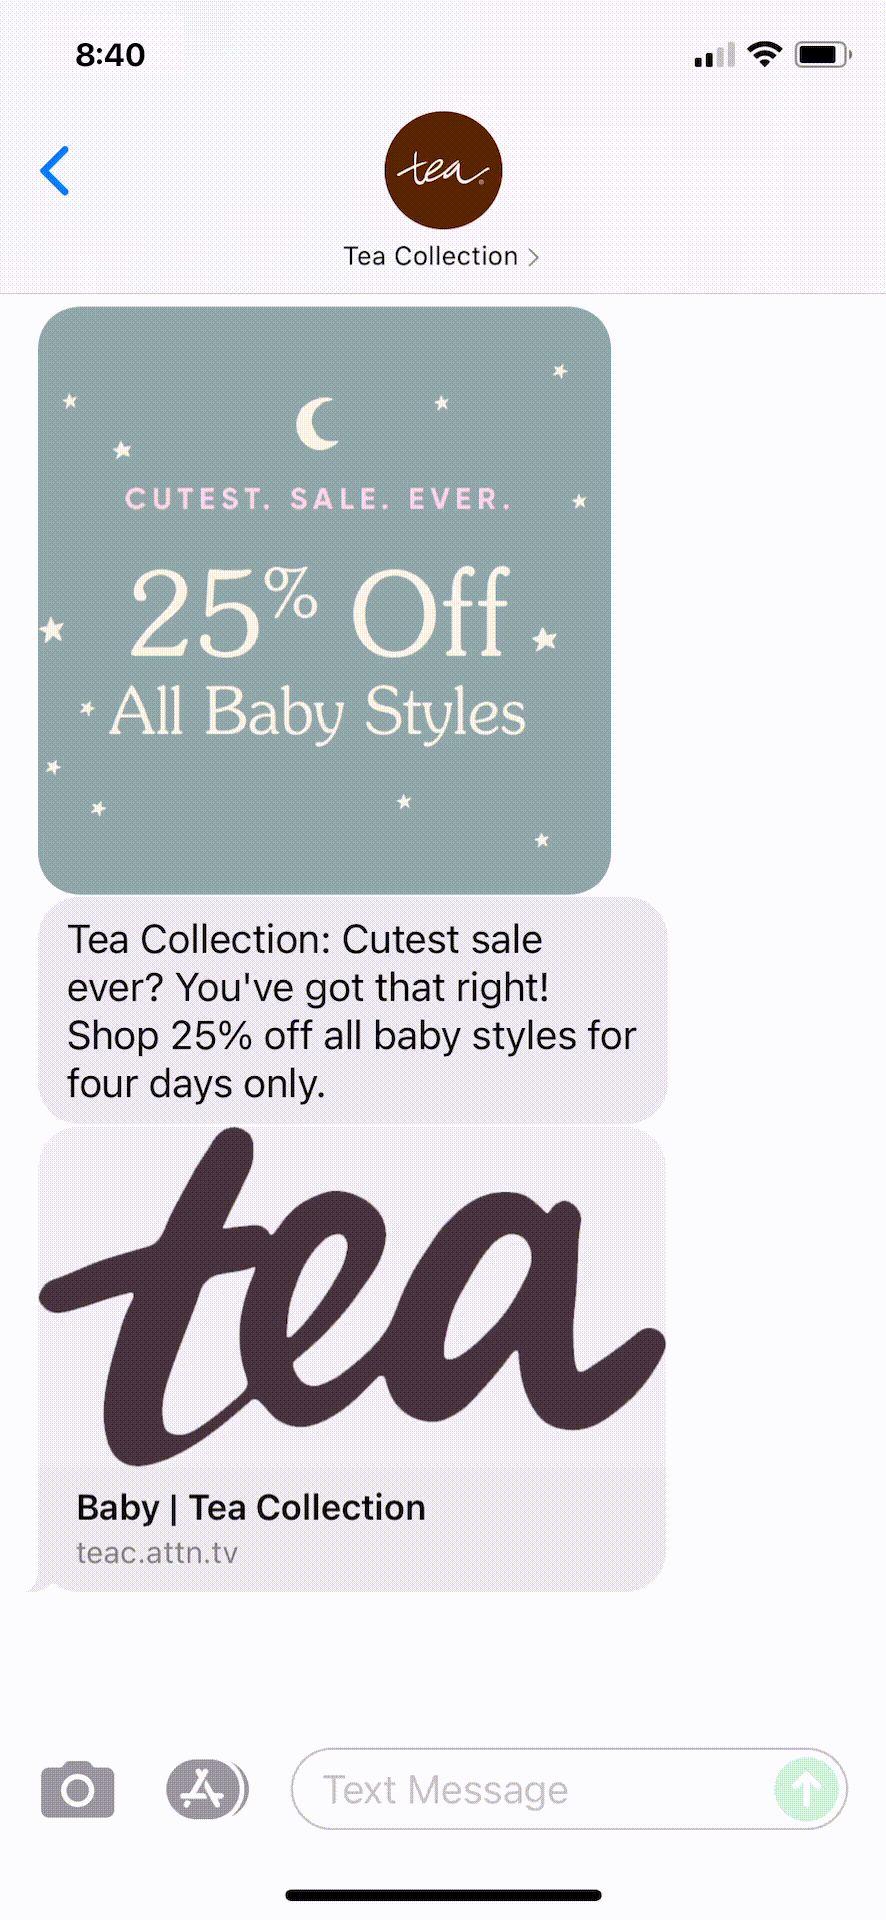 Tea-Collection-Text-Message-Marketing-Example-09.16.2021